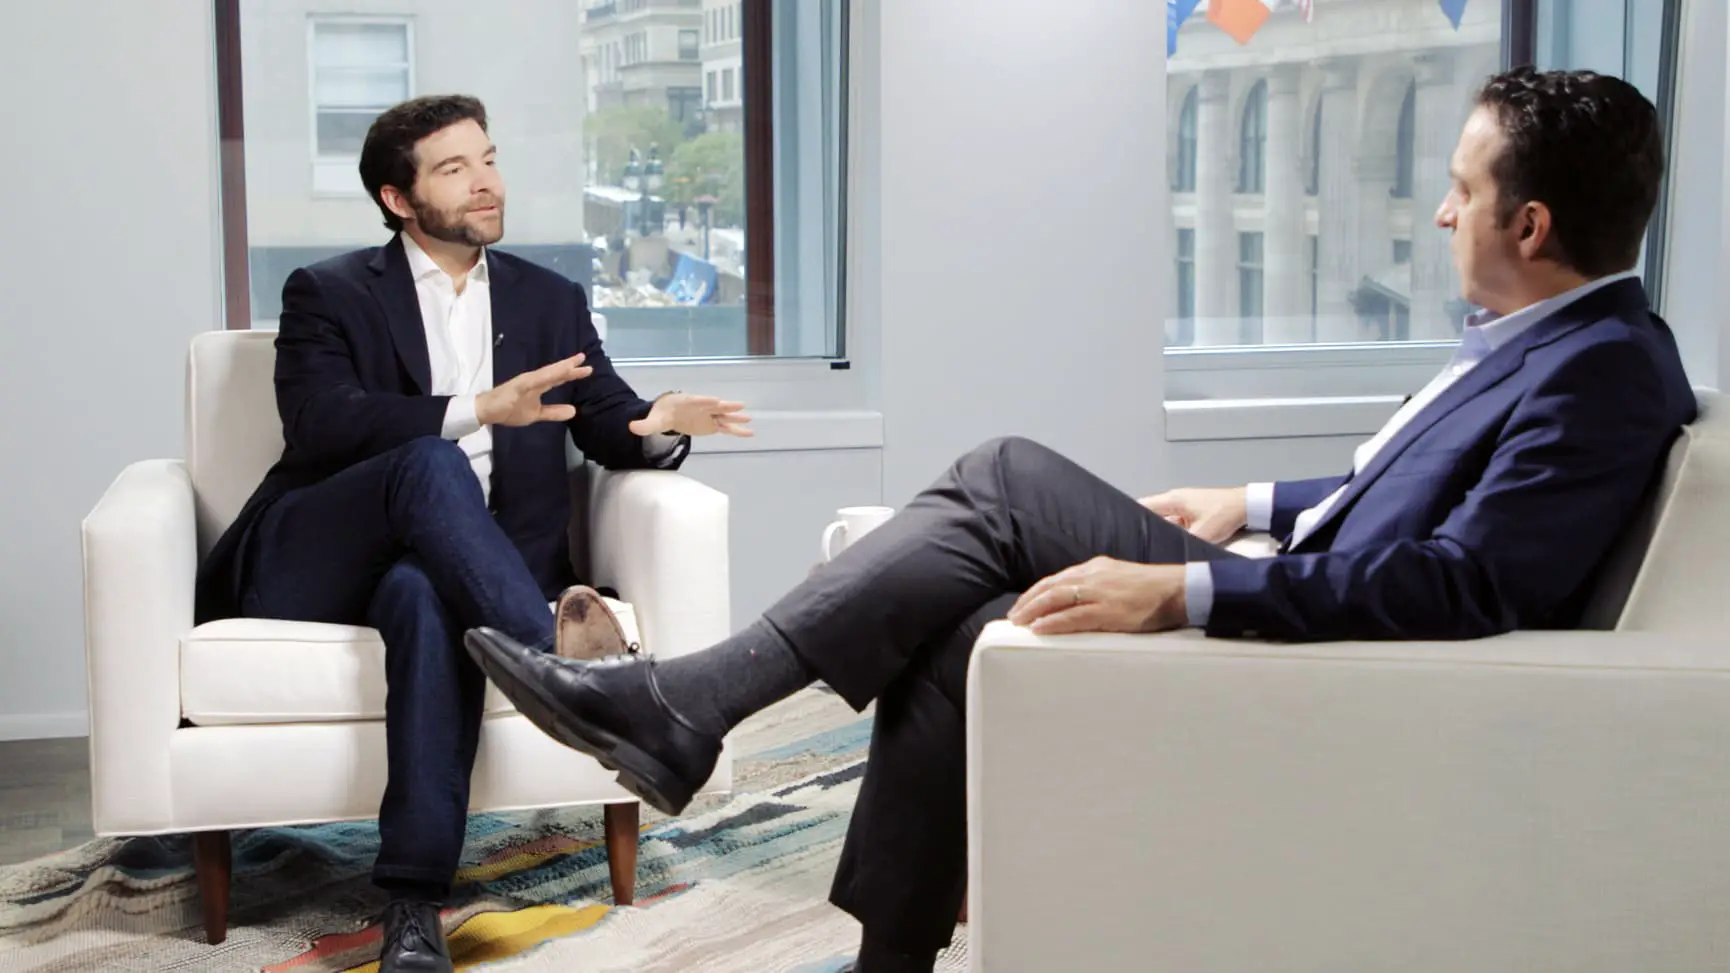 LinkedIn CEO: The most important job interview question